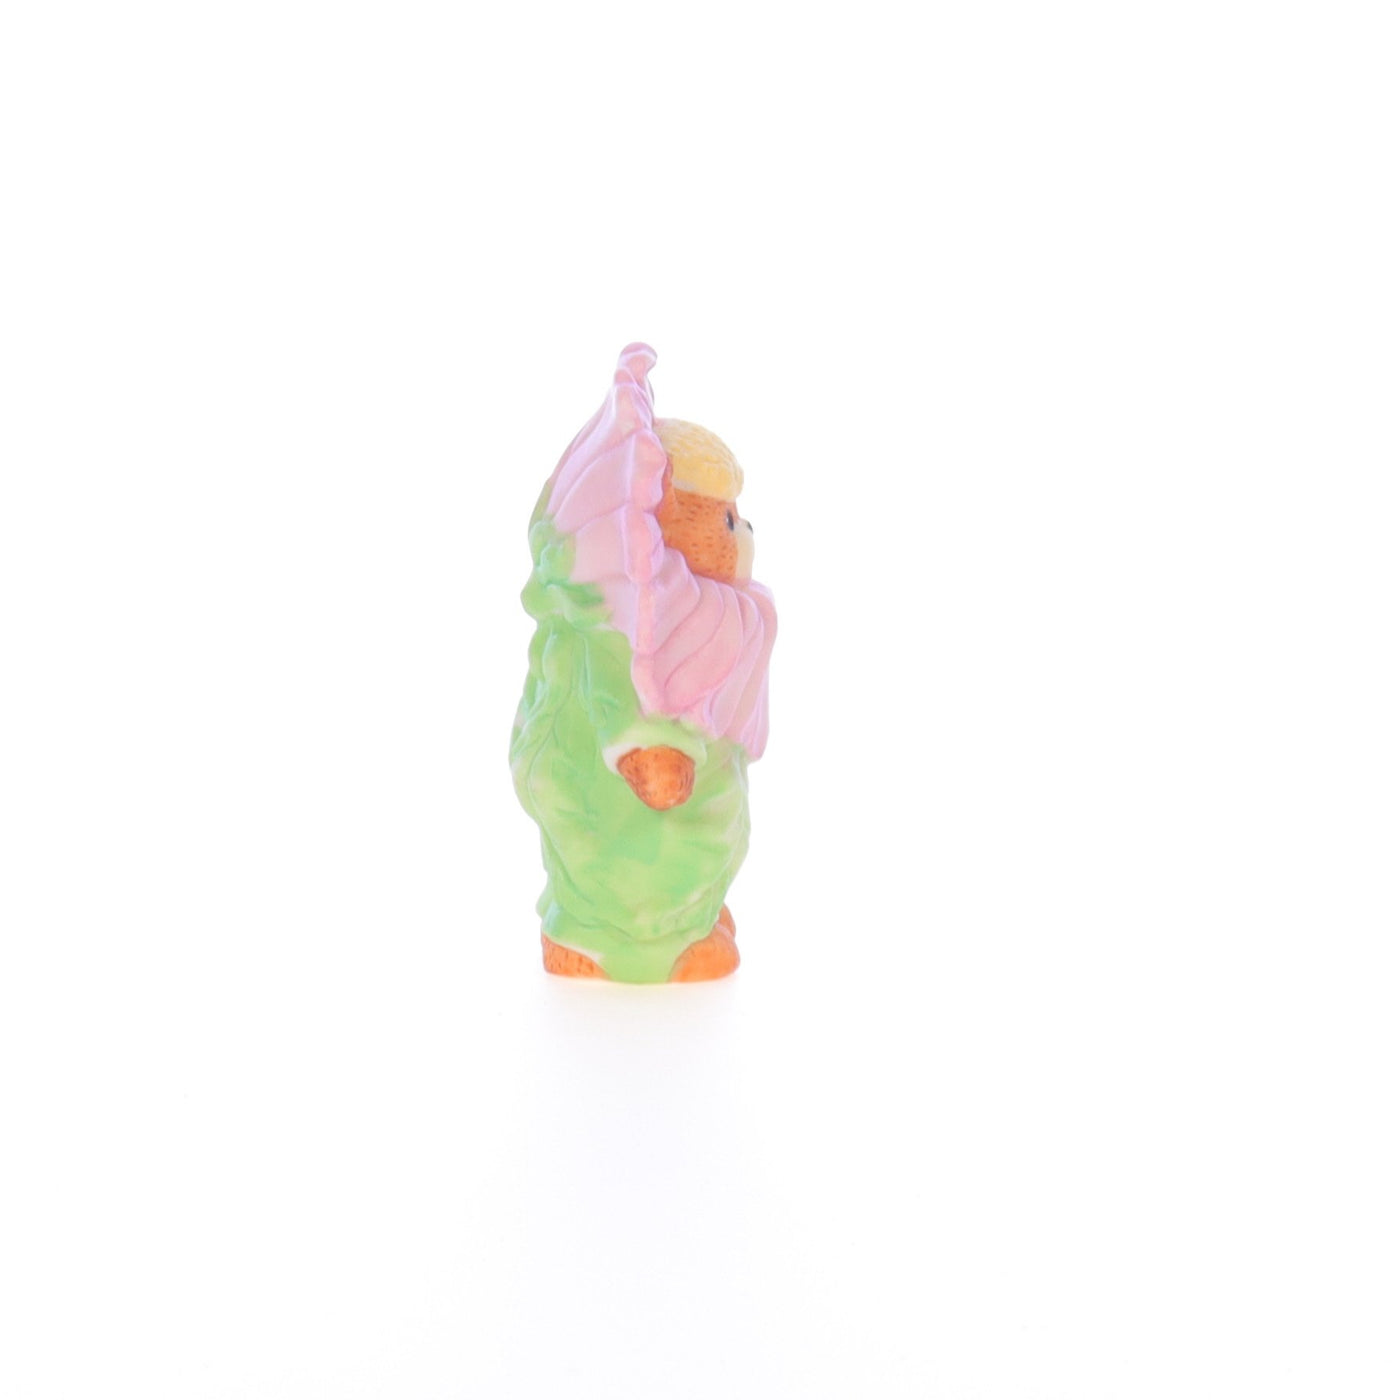 Lucy_And_Me_by_Lucy_Atwell_Porcelain_Figurine_Bear_with_Pink_and_Green_Flower_Costume_Lucy_Unknown_012_07